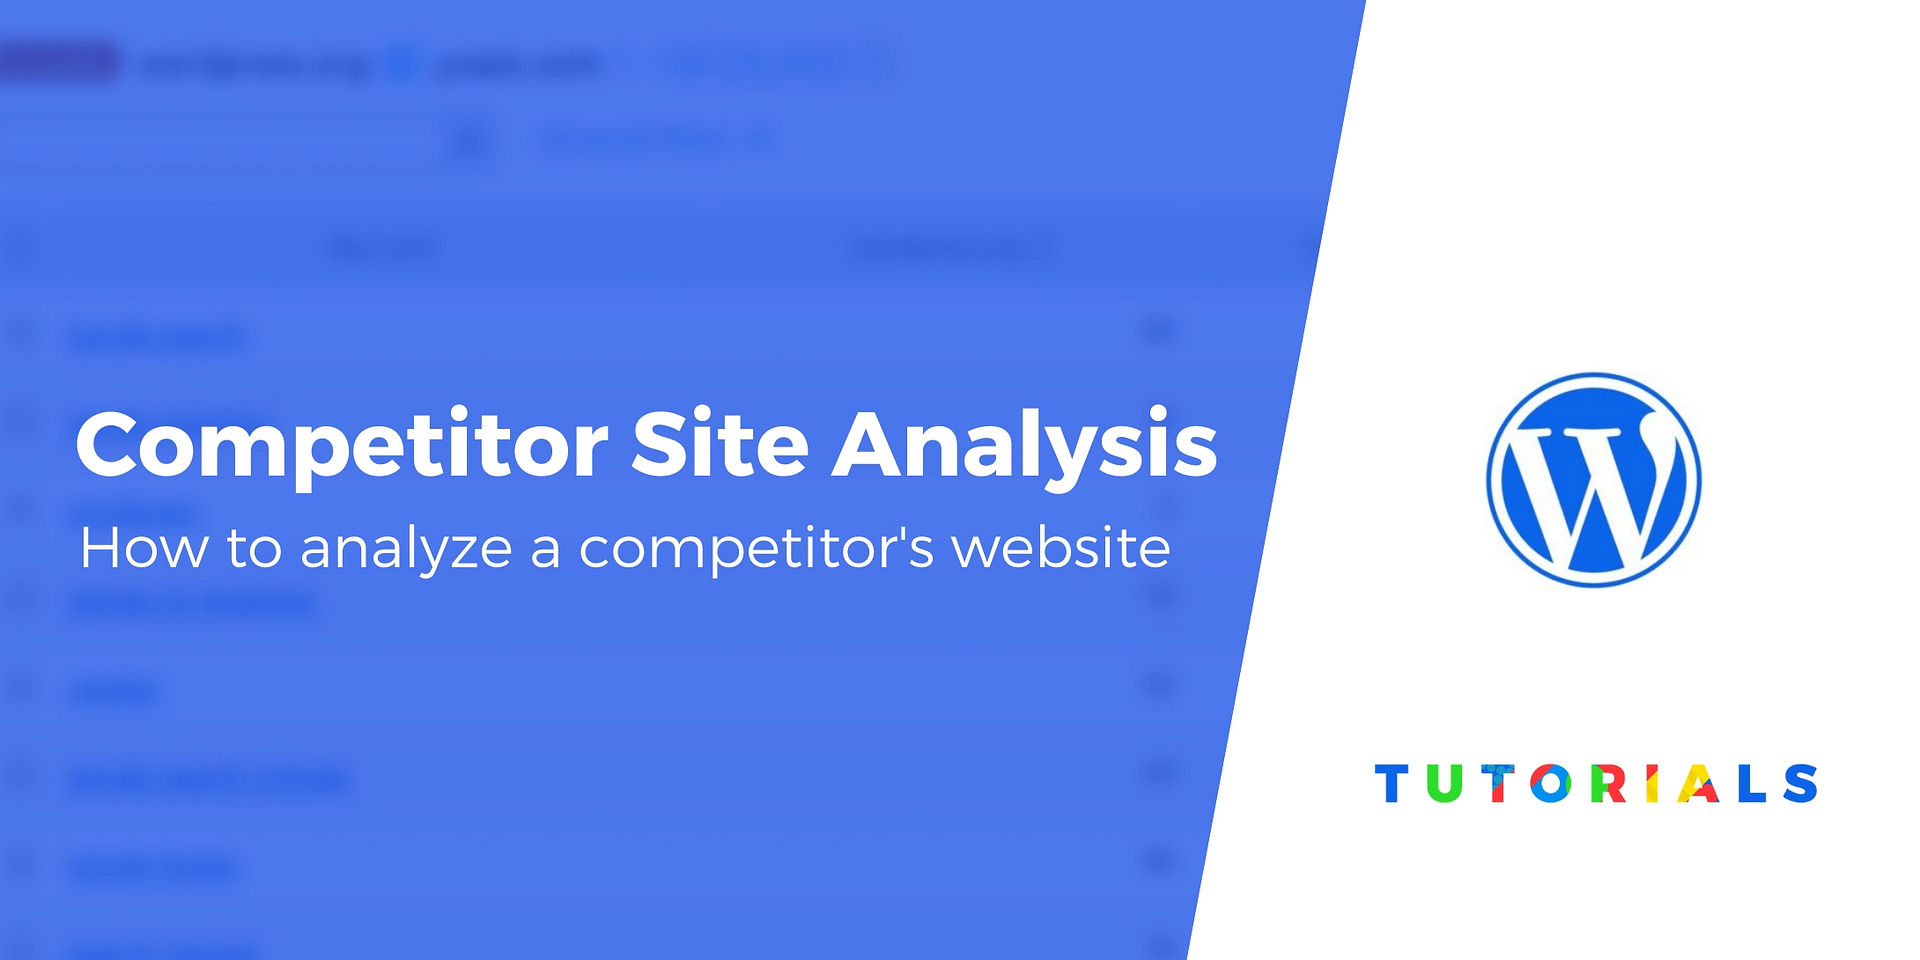 anitube.site Competitors - Top Sites Like anitube.site